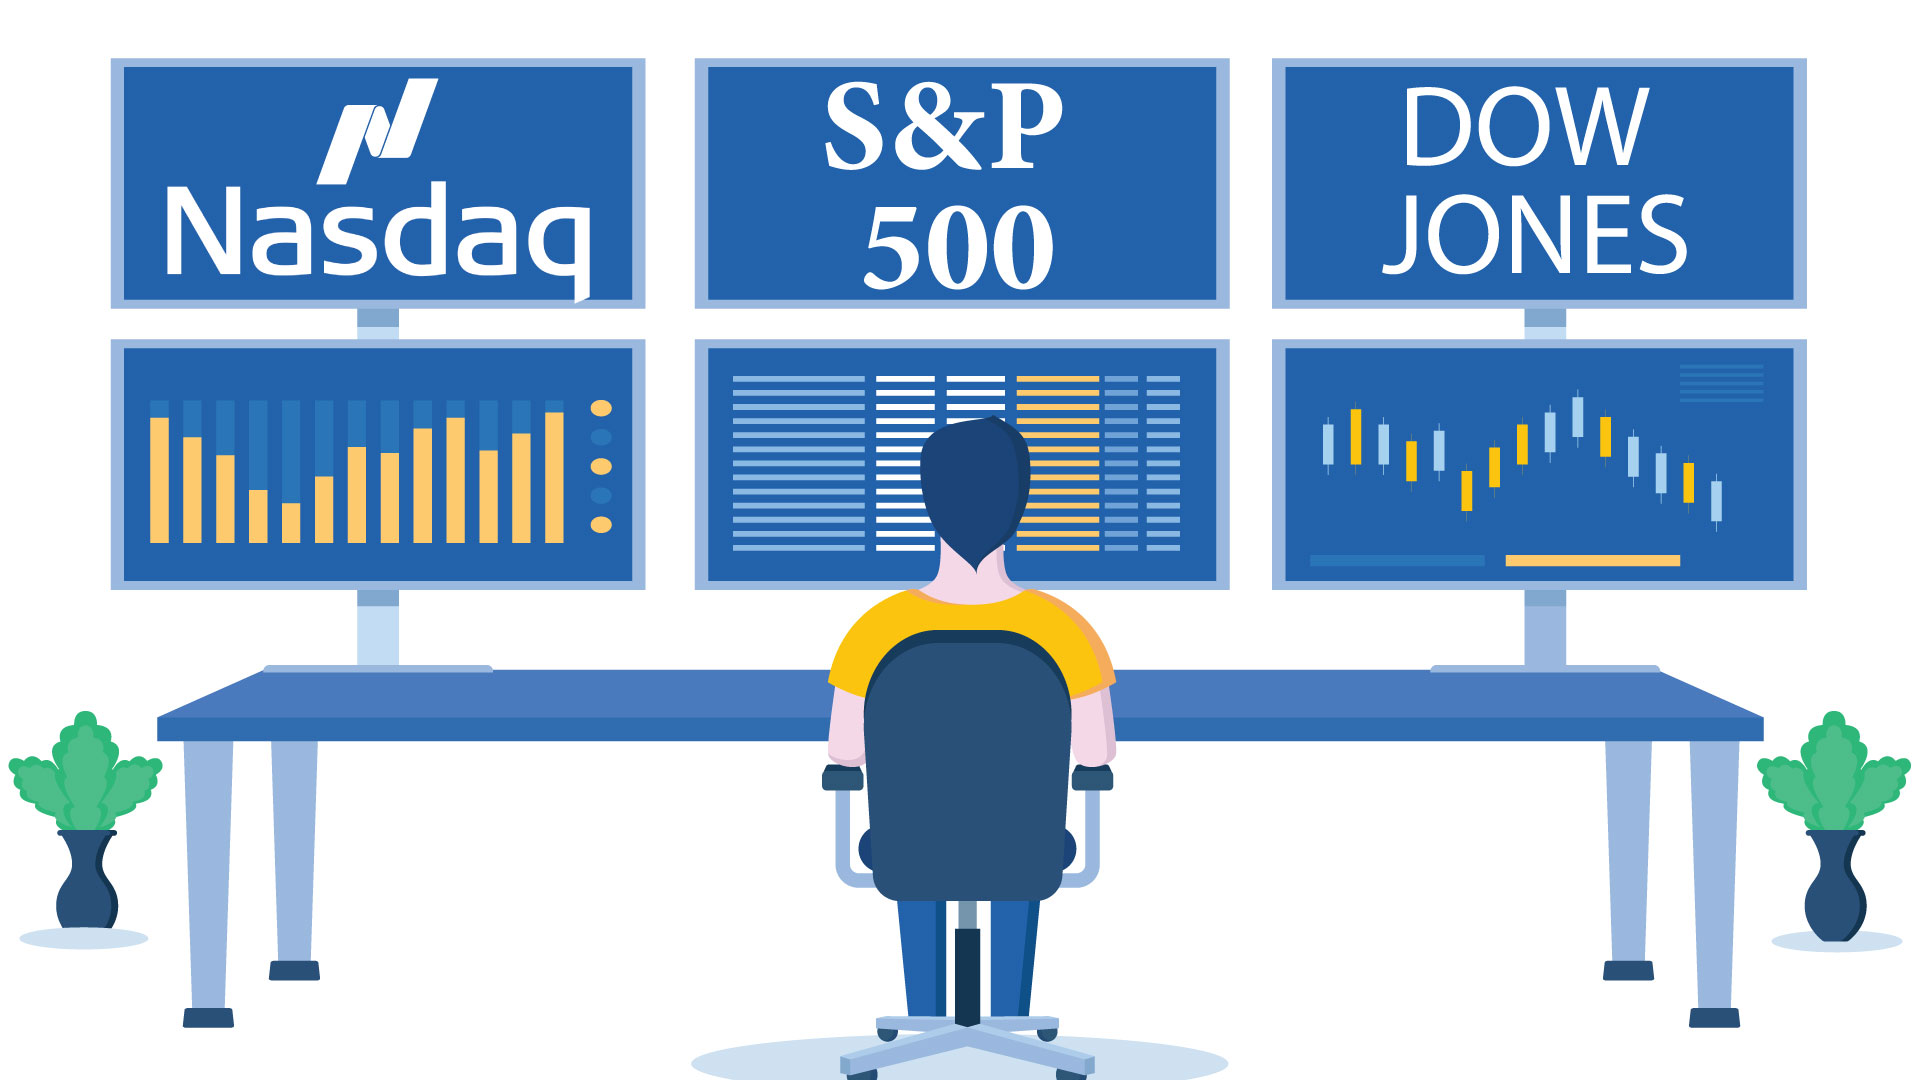 What Are the Various Differences Between the Nasdaq, S&P500, and Dow Jones Indices?